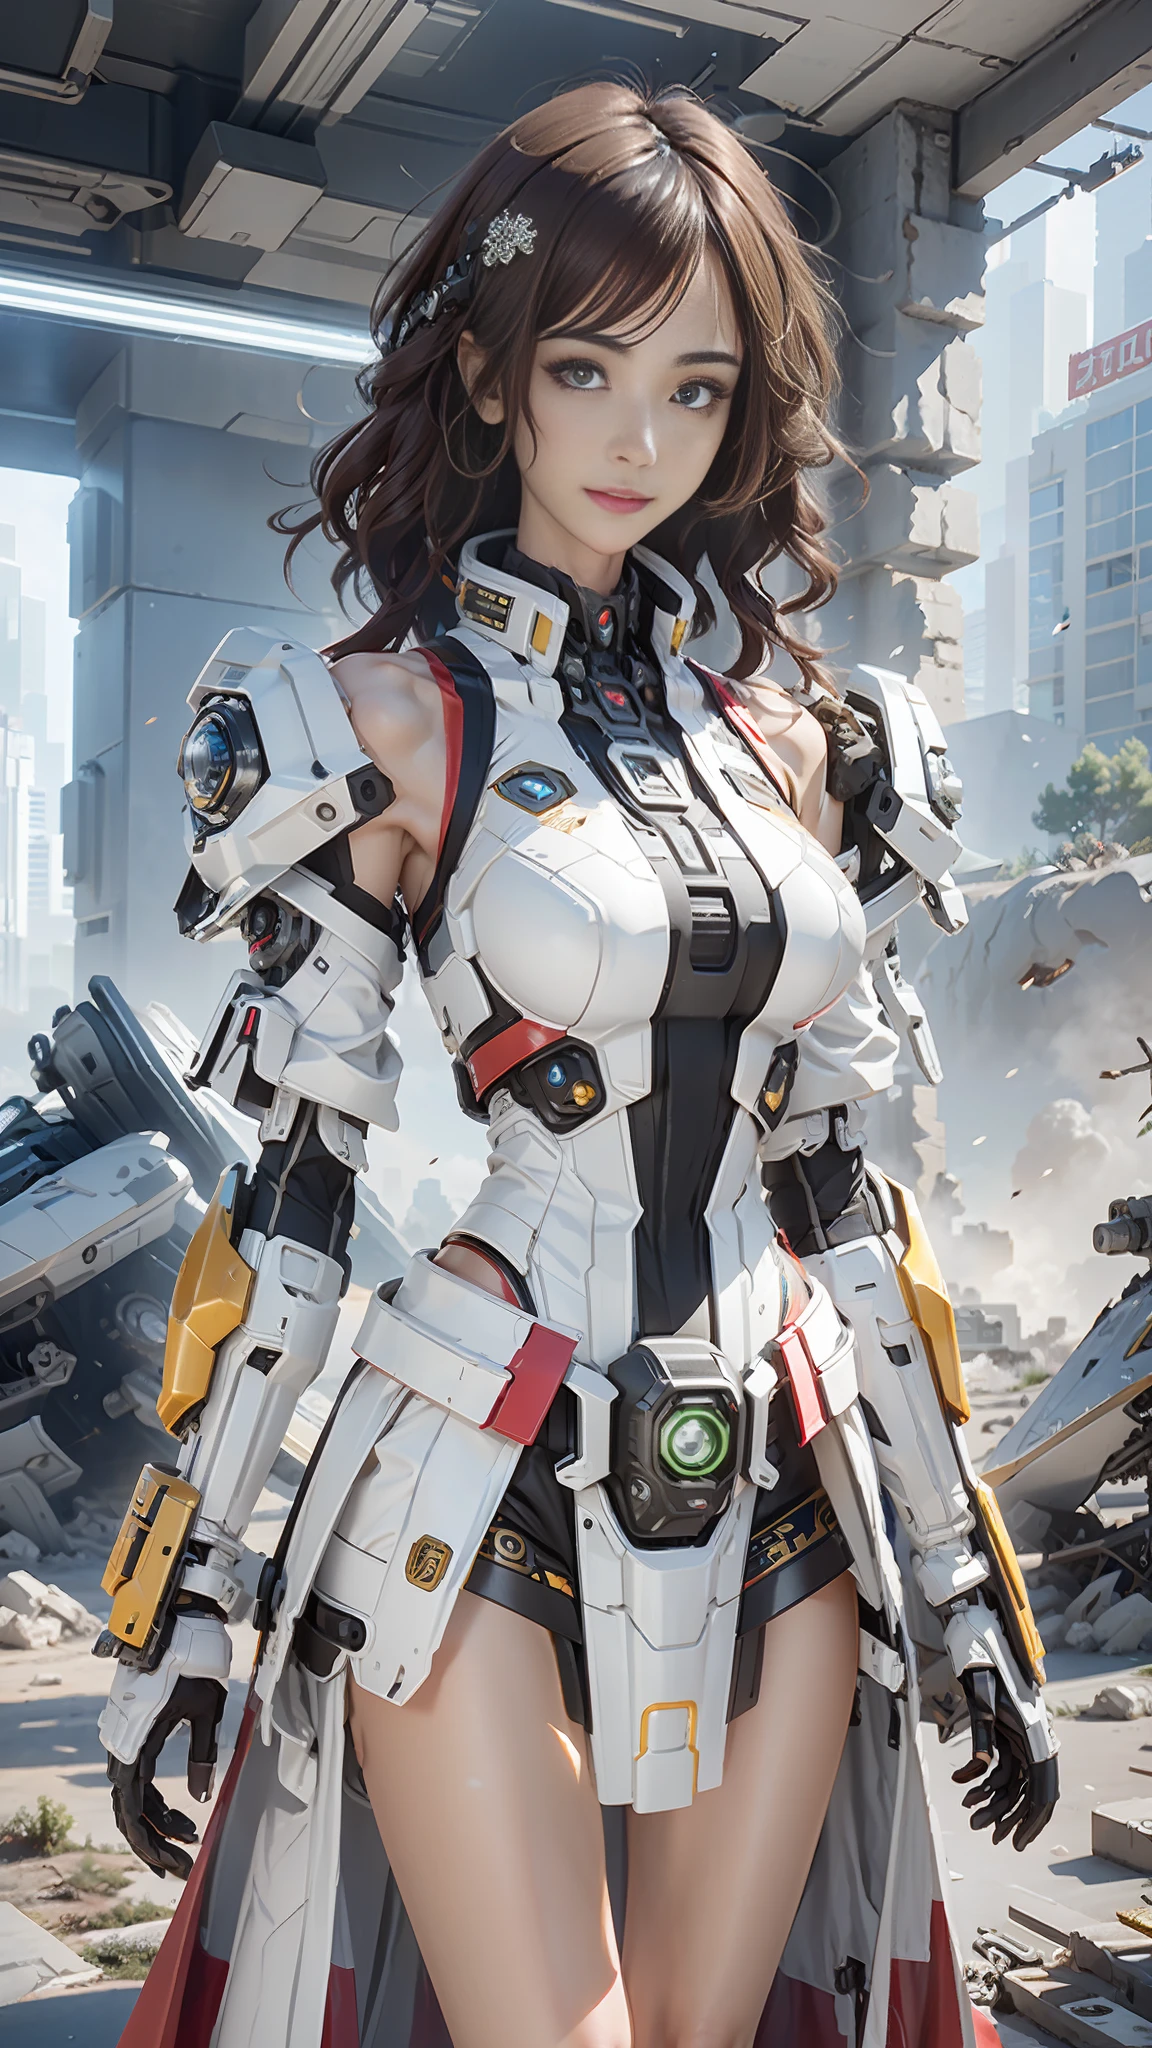 ((Best quality)), ((masterpiece)), (highly detailed:1.3), 3D,Shitu-mecha, beautiful cyberpunk women with her mecha in the ruins of city from a forgoten war, ancient technology,HDR (High Dynamic Range),Ray Tracing,NVIDIA RTX,Super-Resolution,Unreal 5,Subsurface scattering,PBR Texturing,Post-processing,Anisotropic Filtering,Depth-of-field,Maximum clarity and sharpness,Multi-layered textures,Albedo and Specular maps,Surface shading,Accurate simulation of light-material interaction,Perfect proportions,Octane Render,Two-tone lighting,Low ISO,White balance,Rule of thirds,Wide aperature,8K RAW,Efficient Sub-Pixel,sub-pixel convolution,luminescent particles,light scattering,Tyndall effect